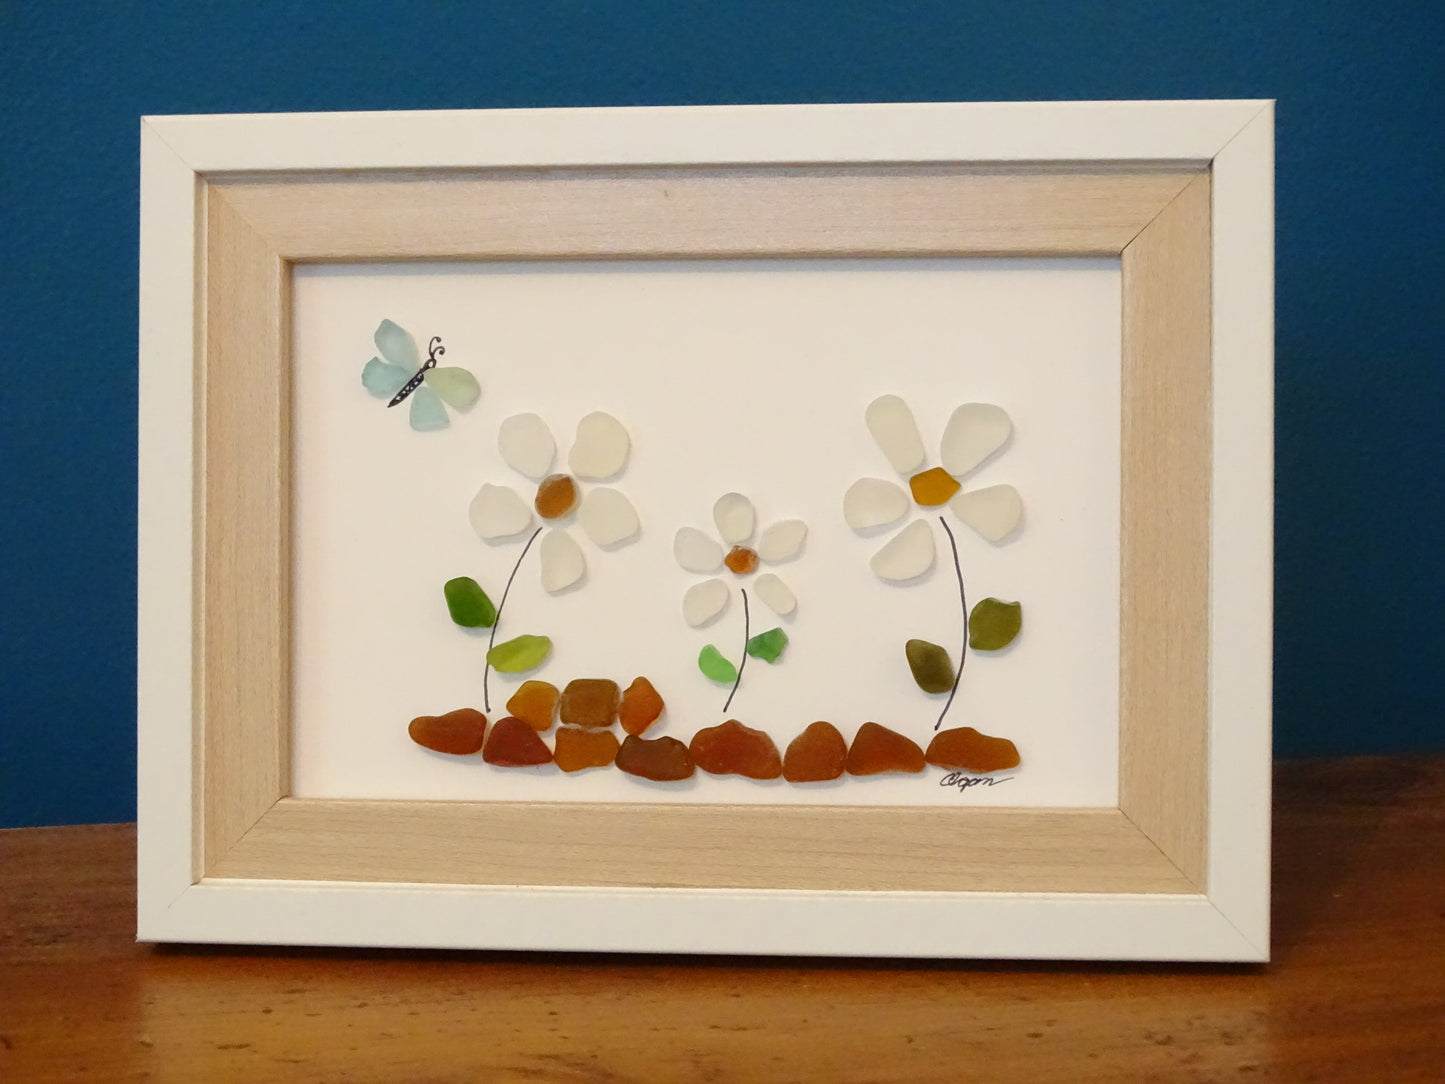 Sea glass daisies and butterfly